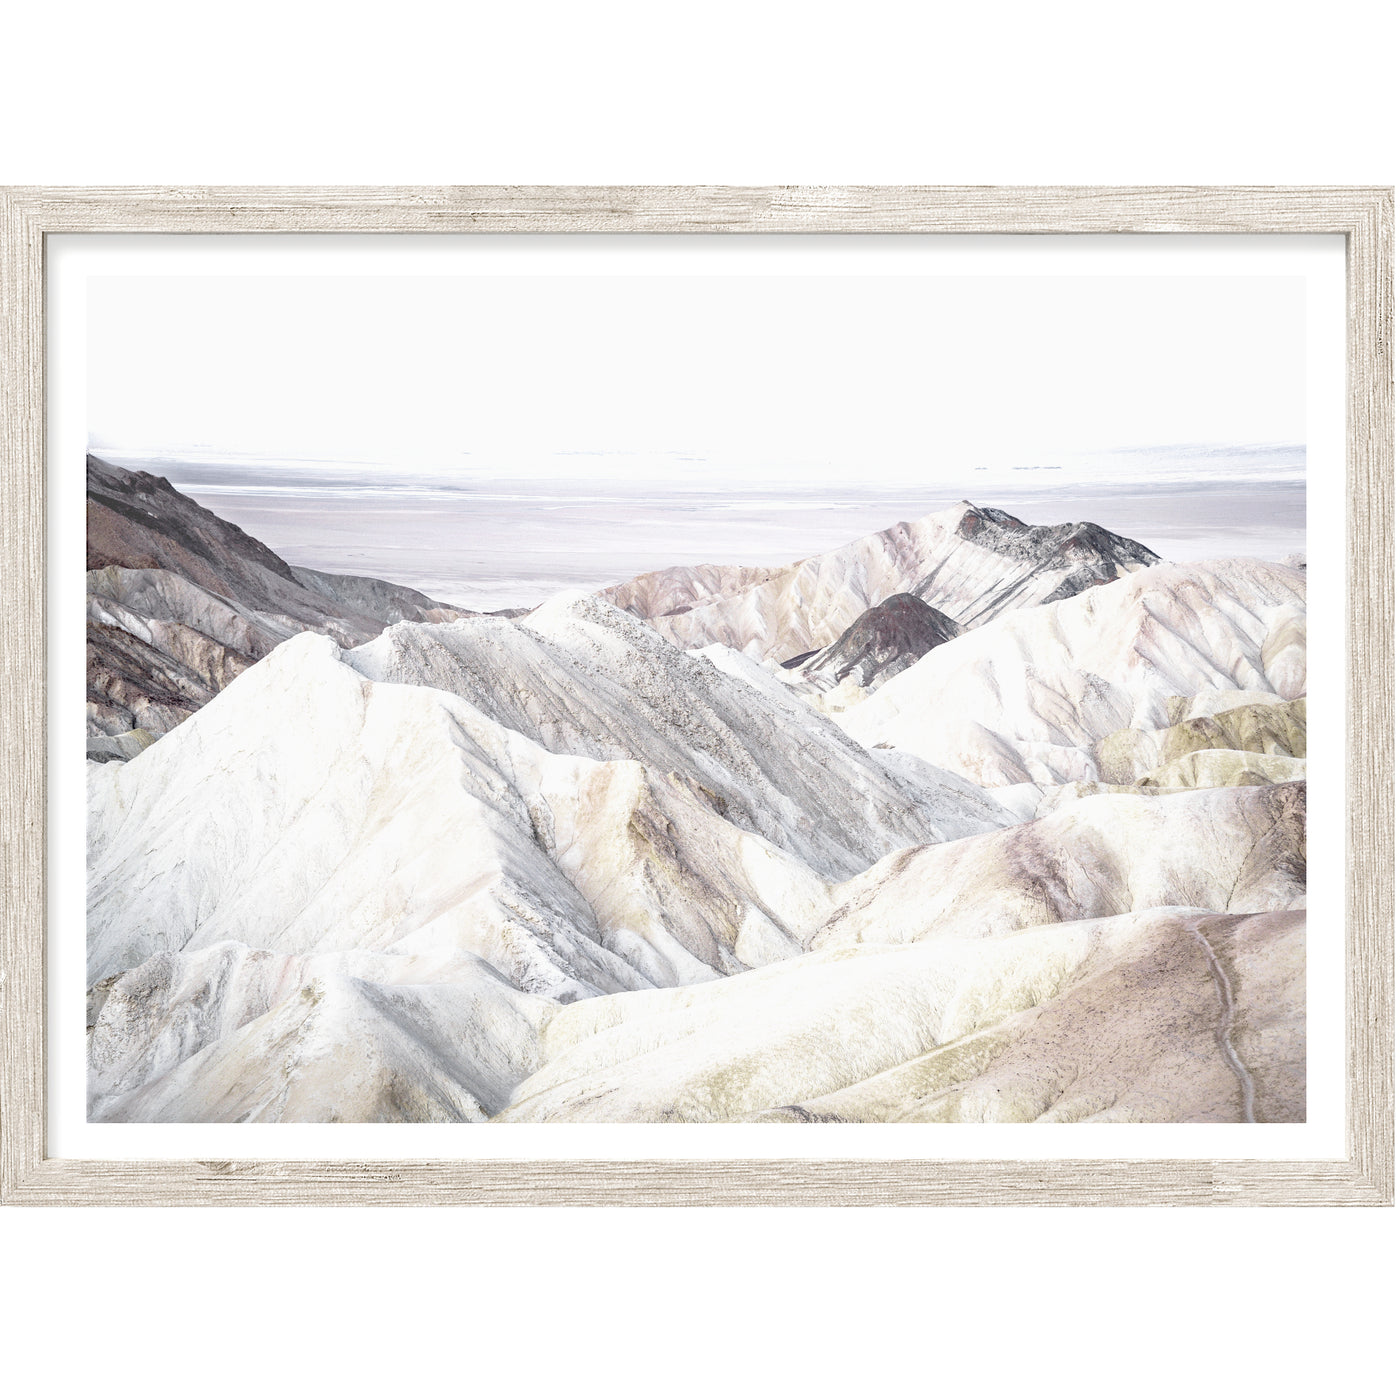 Neutral Nature Wall Art, Death Valley Landscape Photography Print, Large Wall Decor | arrtopia